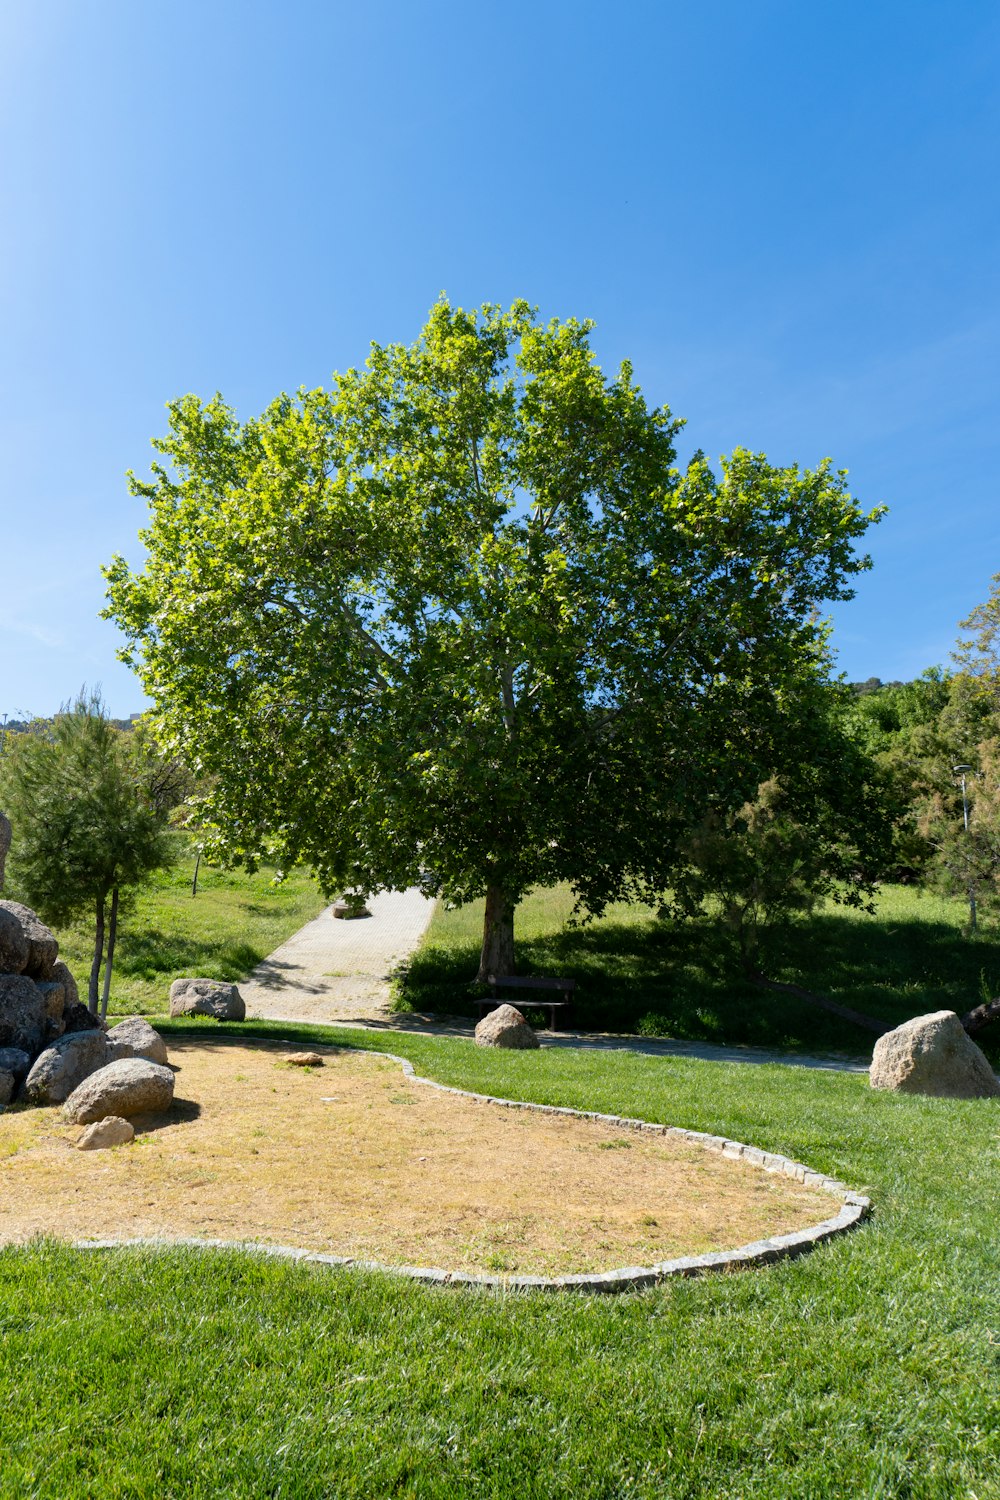 a tree and some rocks in a grassy area